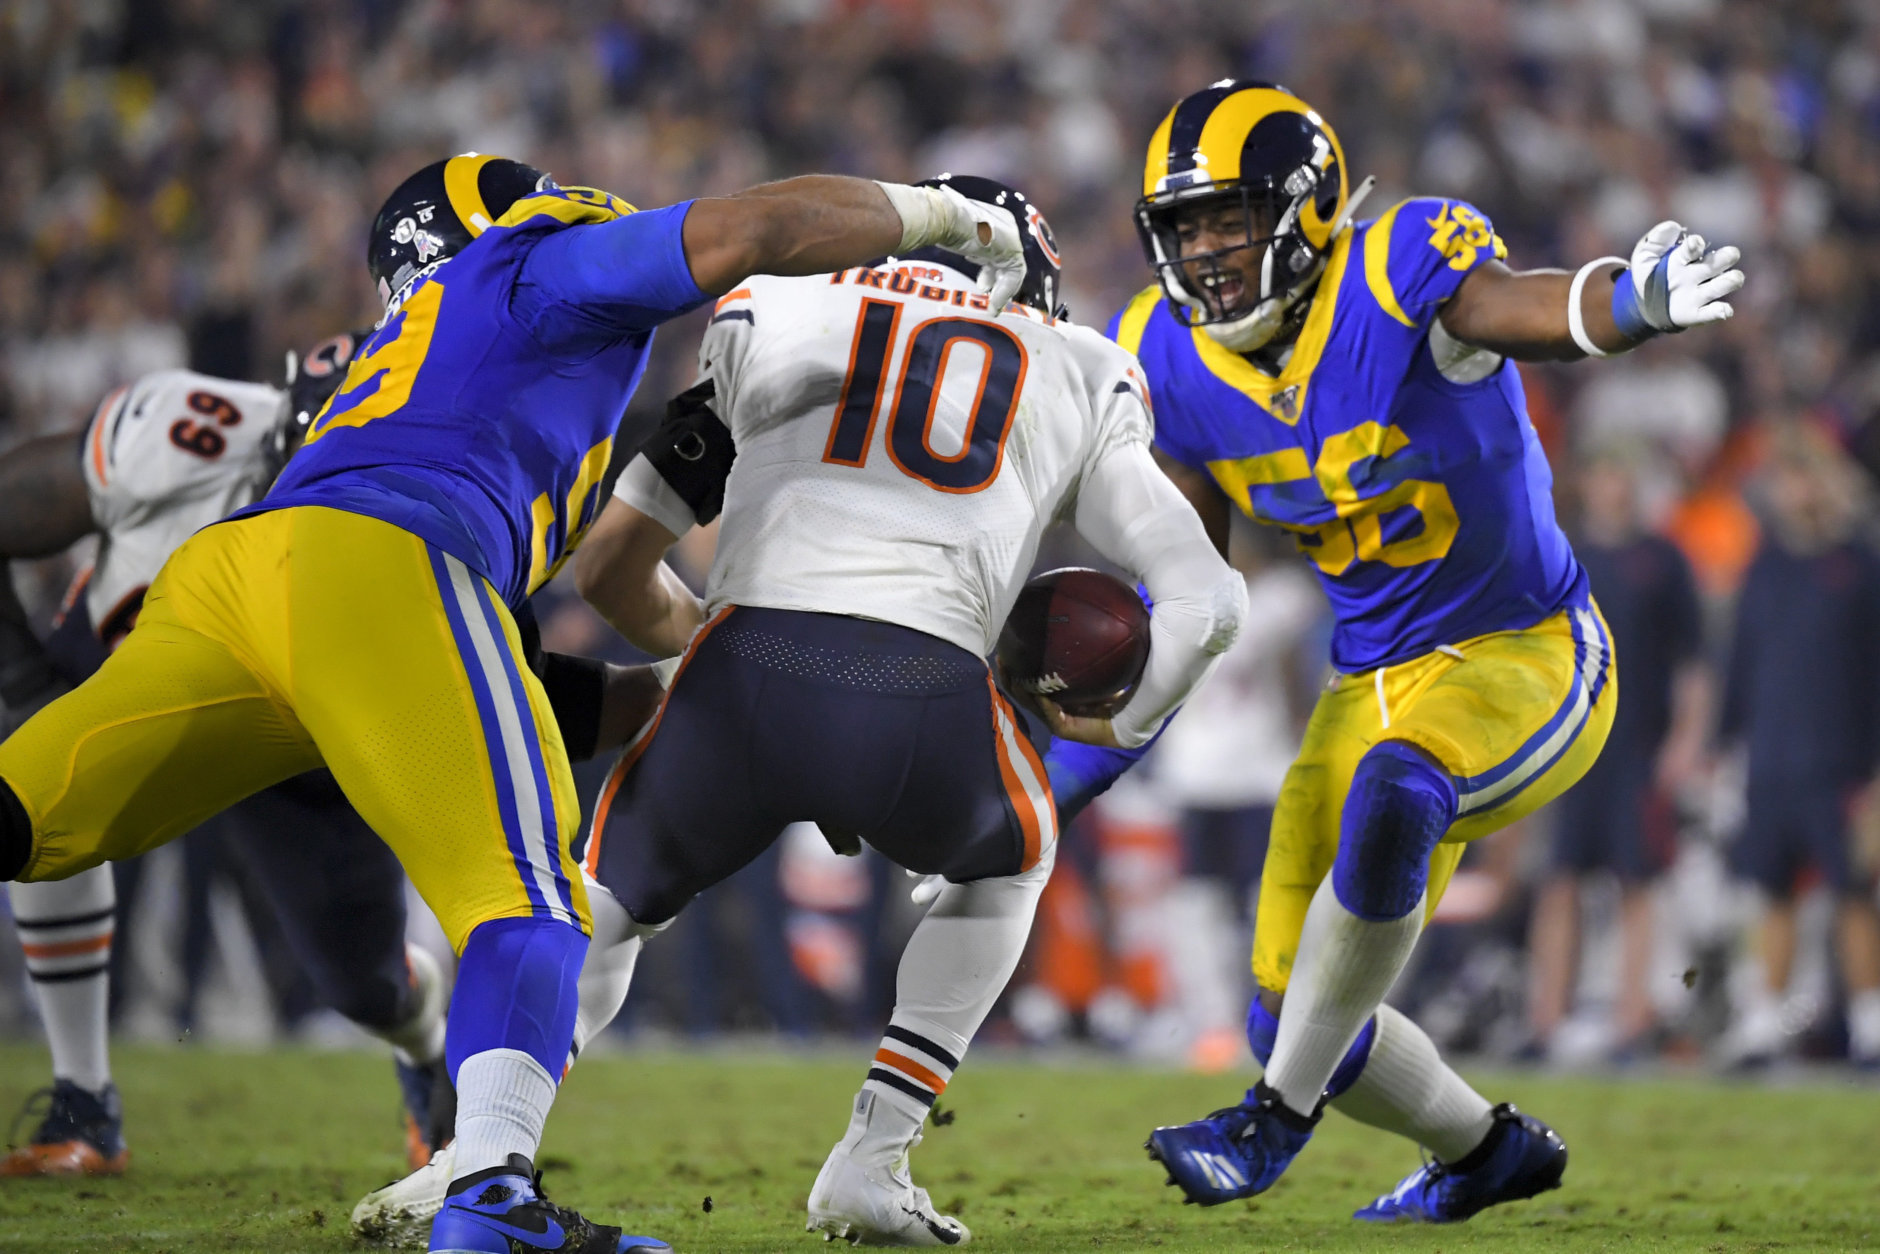 <p><b><i>Bears 7</i></b><br />
<b><i>Rams 17</i></b></p>
<p>If <a href="https://profootballtalk.nbcsports.com/2019/11/13/eddie-jackson-finds-his-interception-drought-stressful/" target="_blank" rel="noopener">Eddie Jackson&#8217;s interception drought</a> is stressful, Chicago must be having a nervous breakdown over Mitchell Trubisky. The Bears&#8217; decision to trade up for the second coming of Josh Freeman rather than Patrick Mahomes or Deshaun Watson is undermining the efforts of a great defense and will haunt Chicago for decades.</p>
